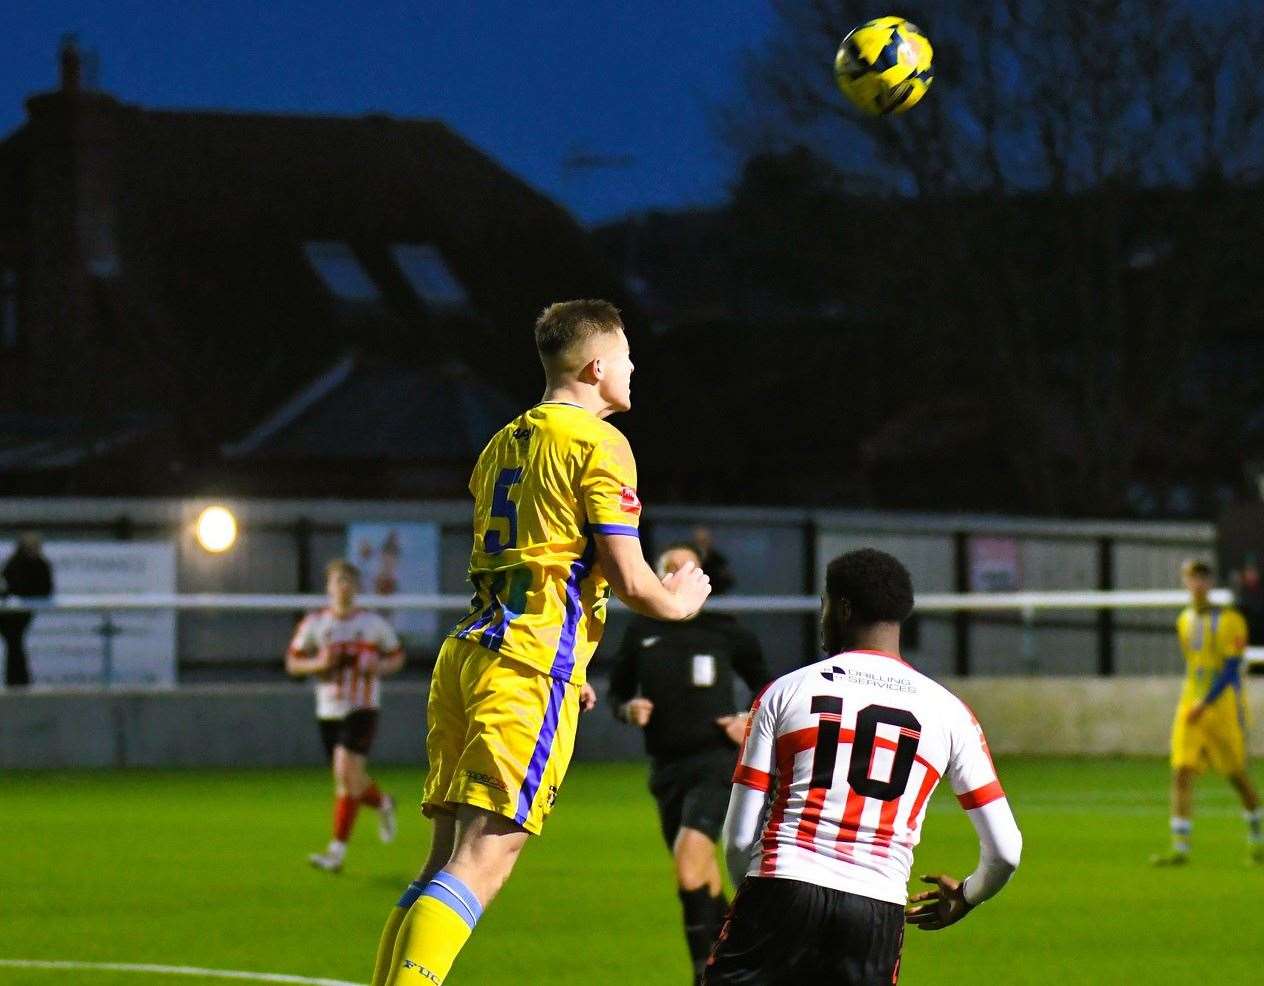 Sittingbourne defender Joe Tyrie heads clear ahead of Sheppey United striker Javaun Splatt during a Boxing Day 3-3 draw. Picture: Marc Richards